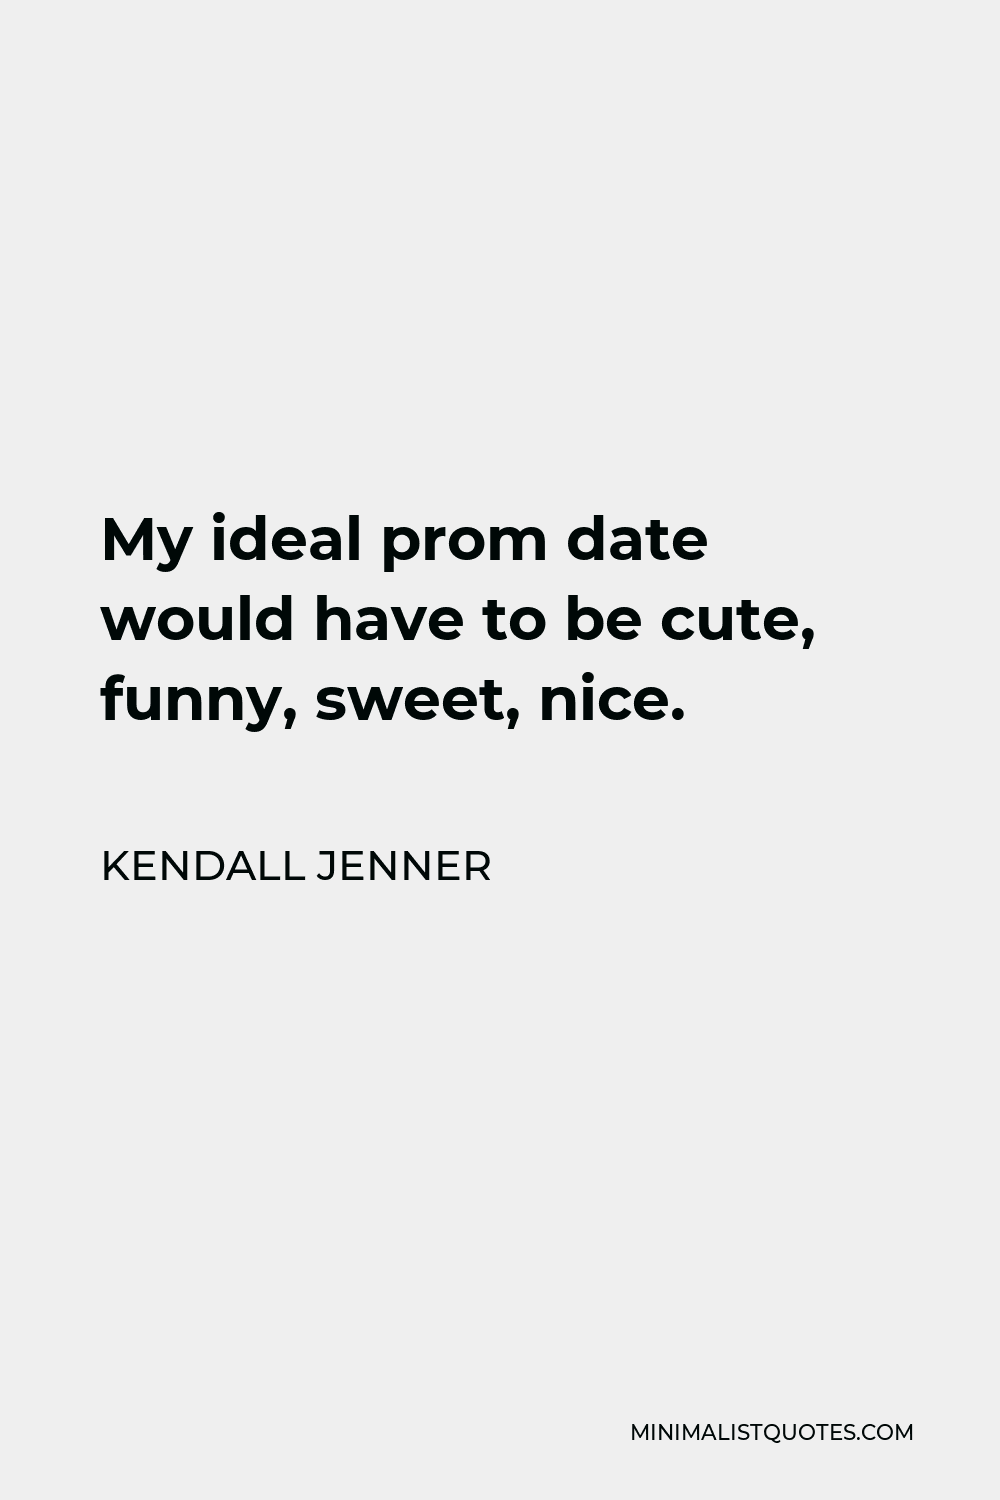 Kendall Jenner Quote - My ideal prom date would have to be cute, funny, sweet, nice.